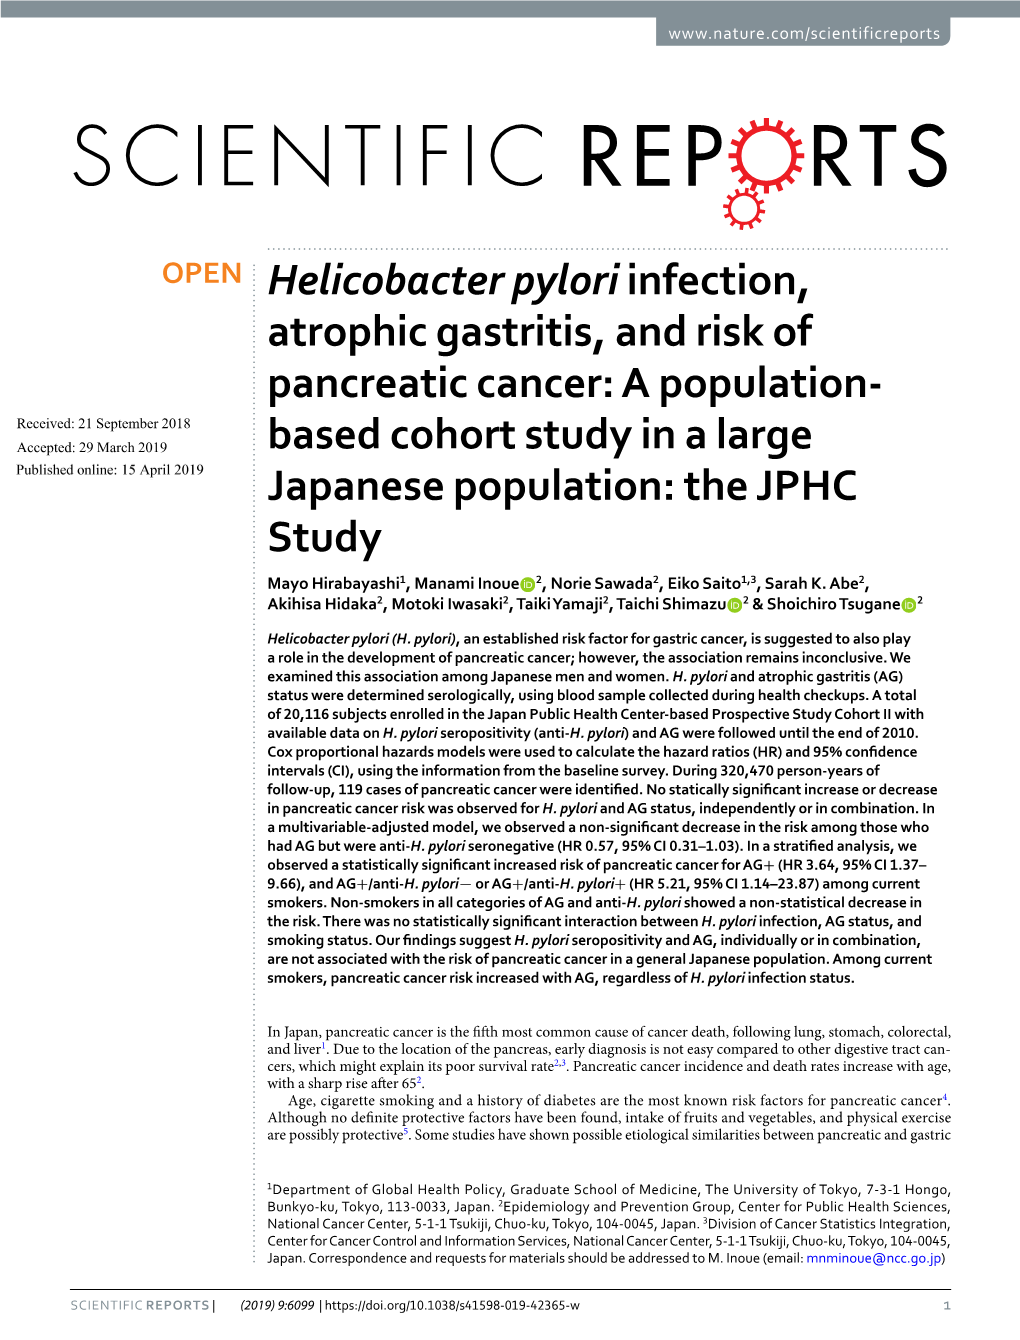 Helicobacter Pylori Infection, Atrophic Gastritis, and Risk of Pancreatic Cancer